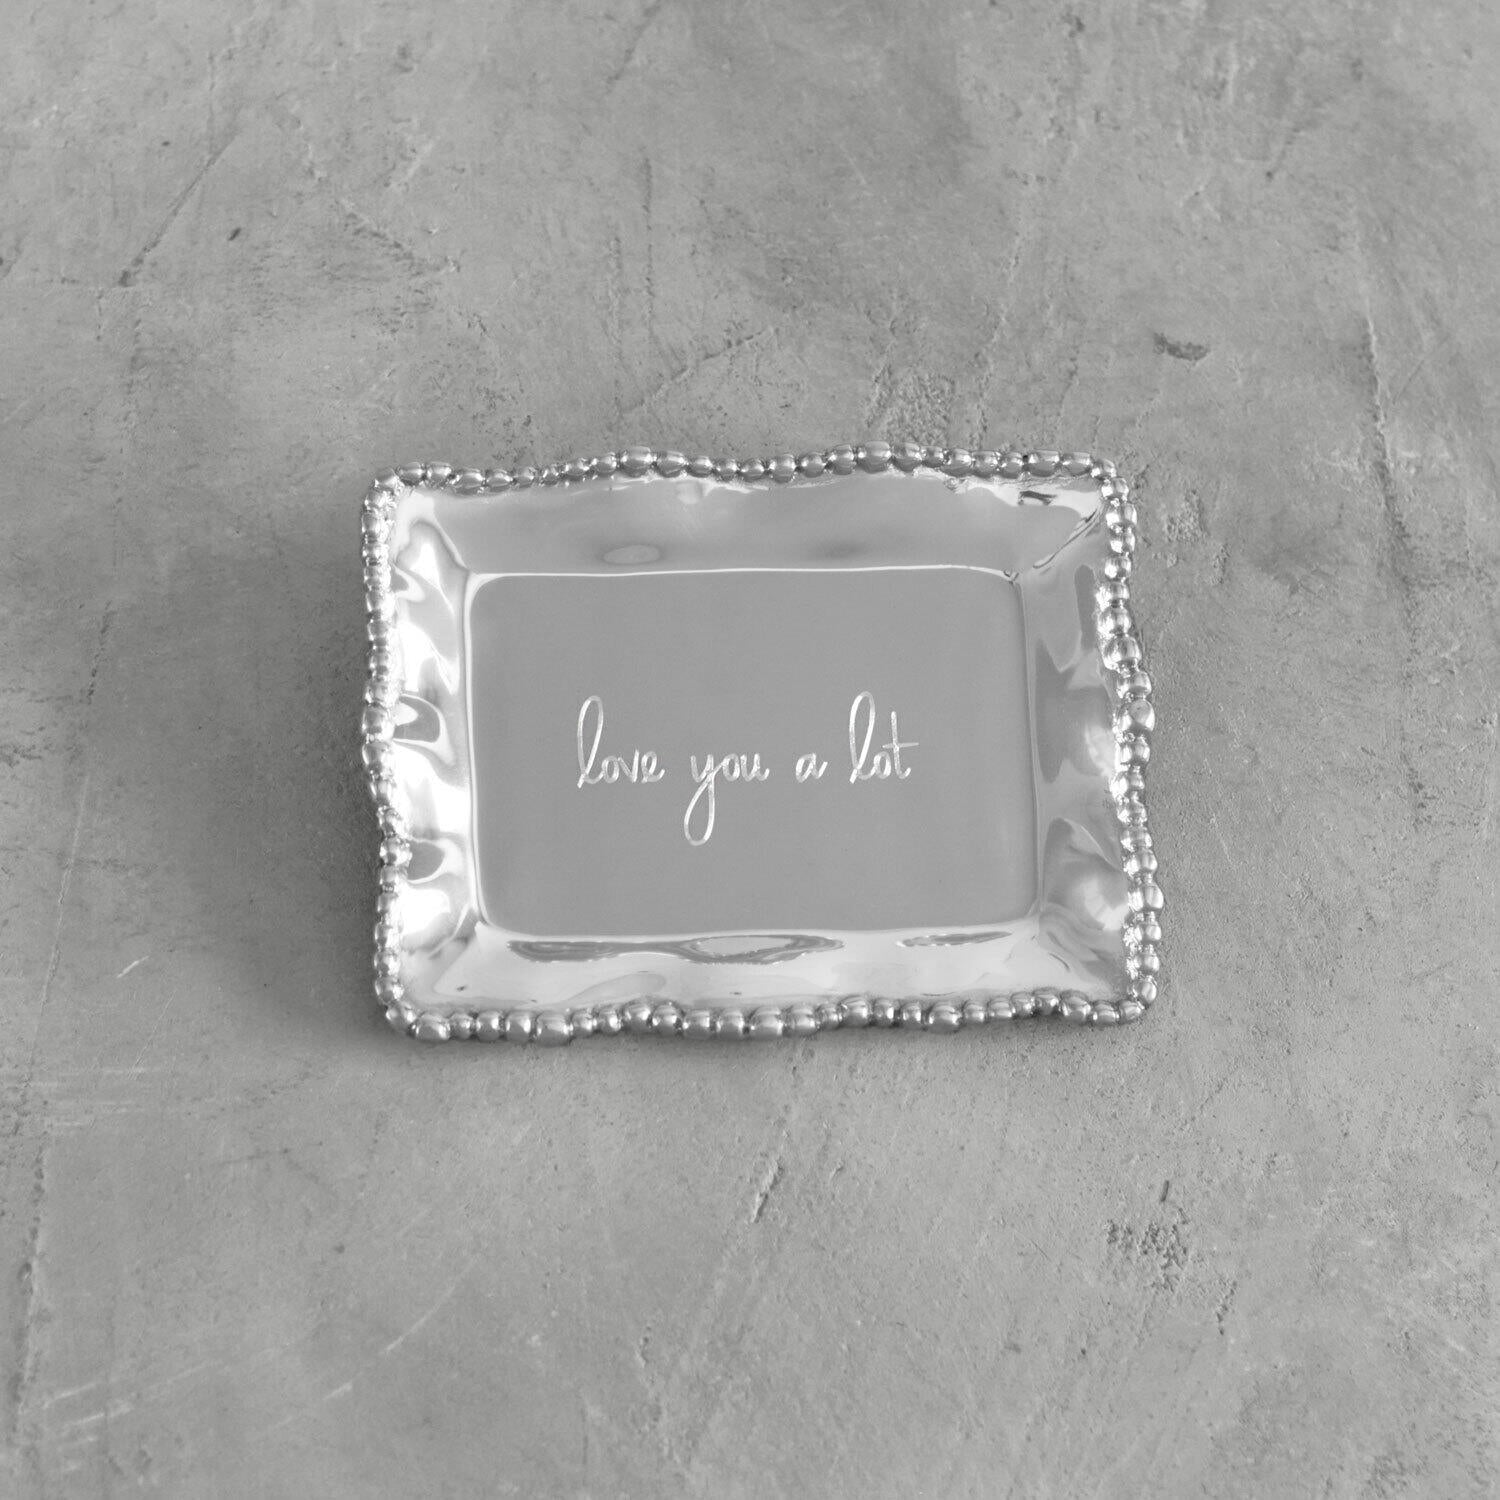 GIFTABLES Organic Pearl Rectangular Engraved Tray - love you a lot